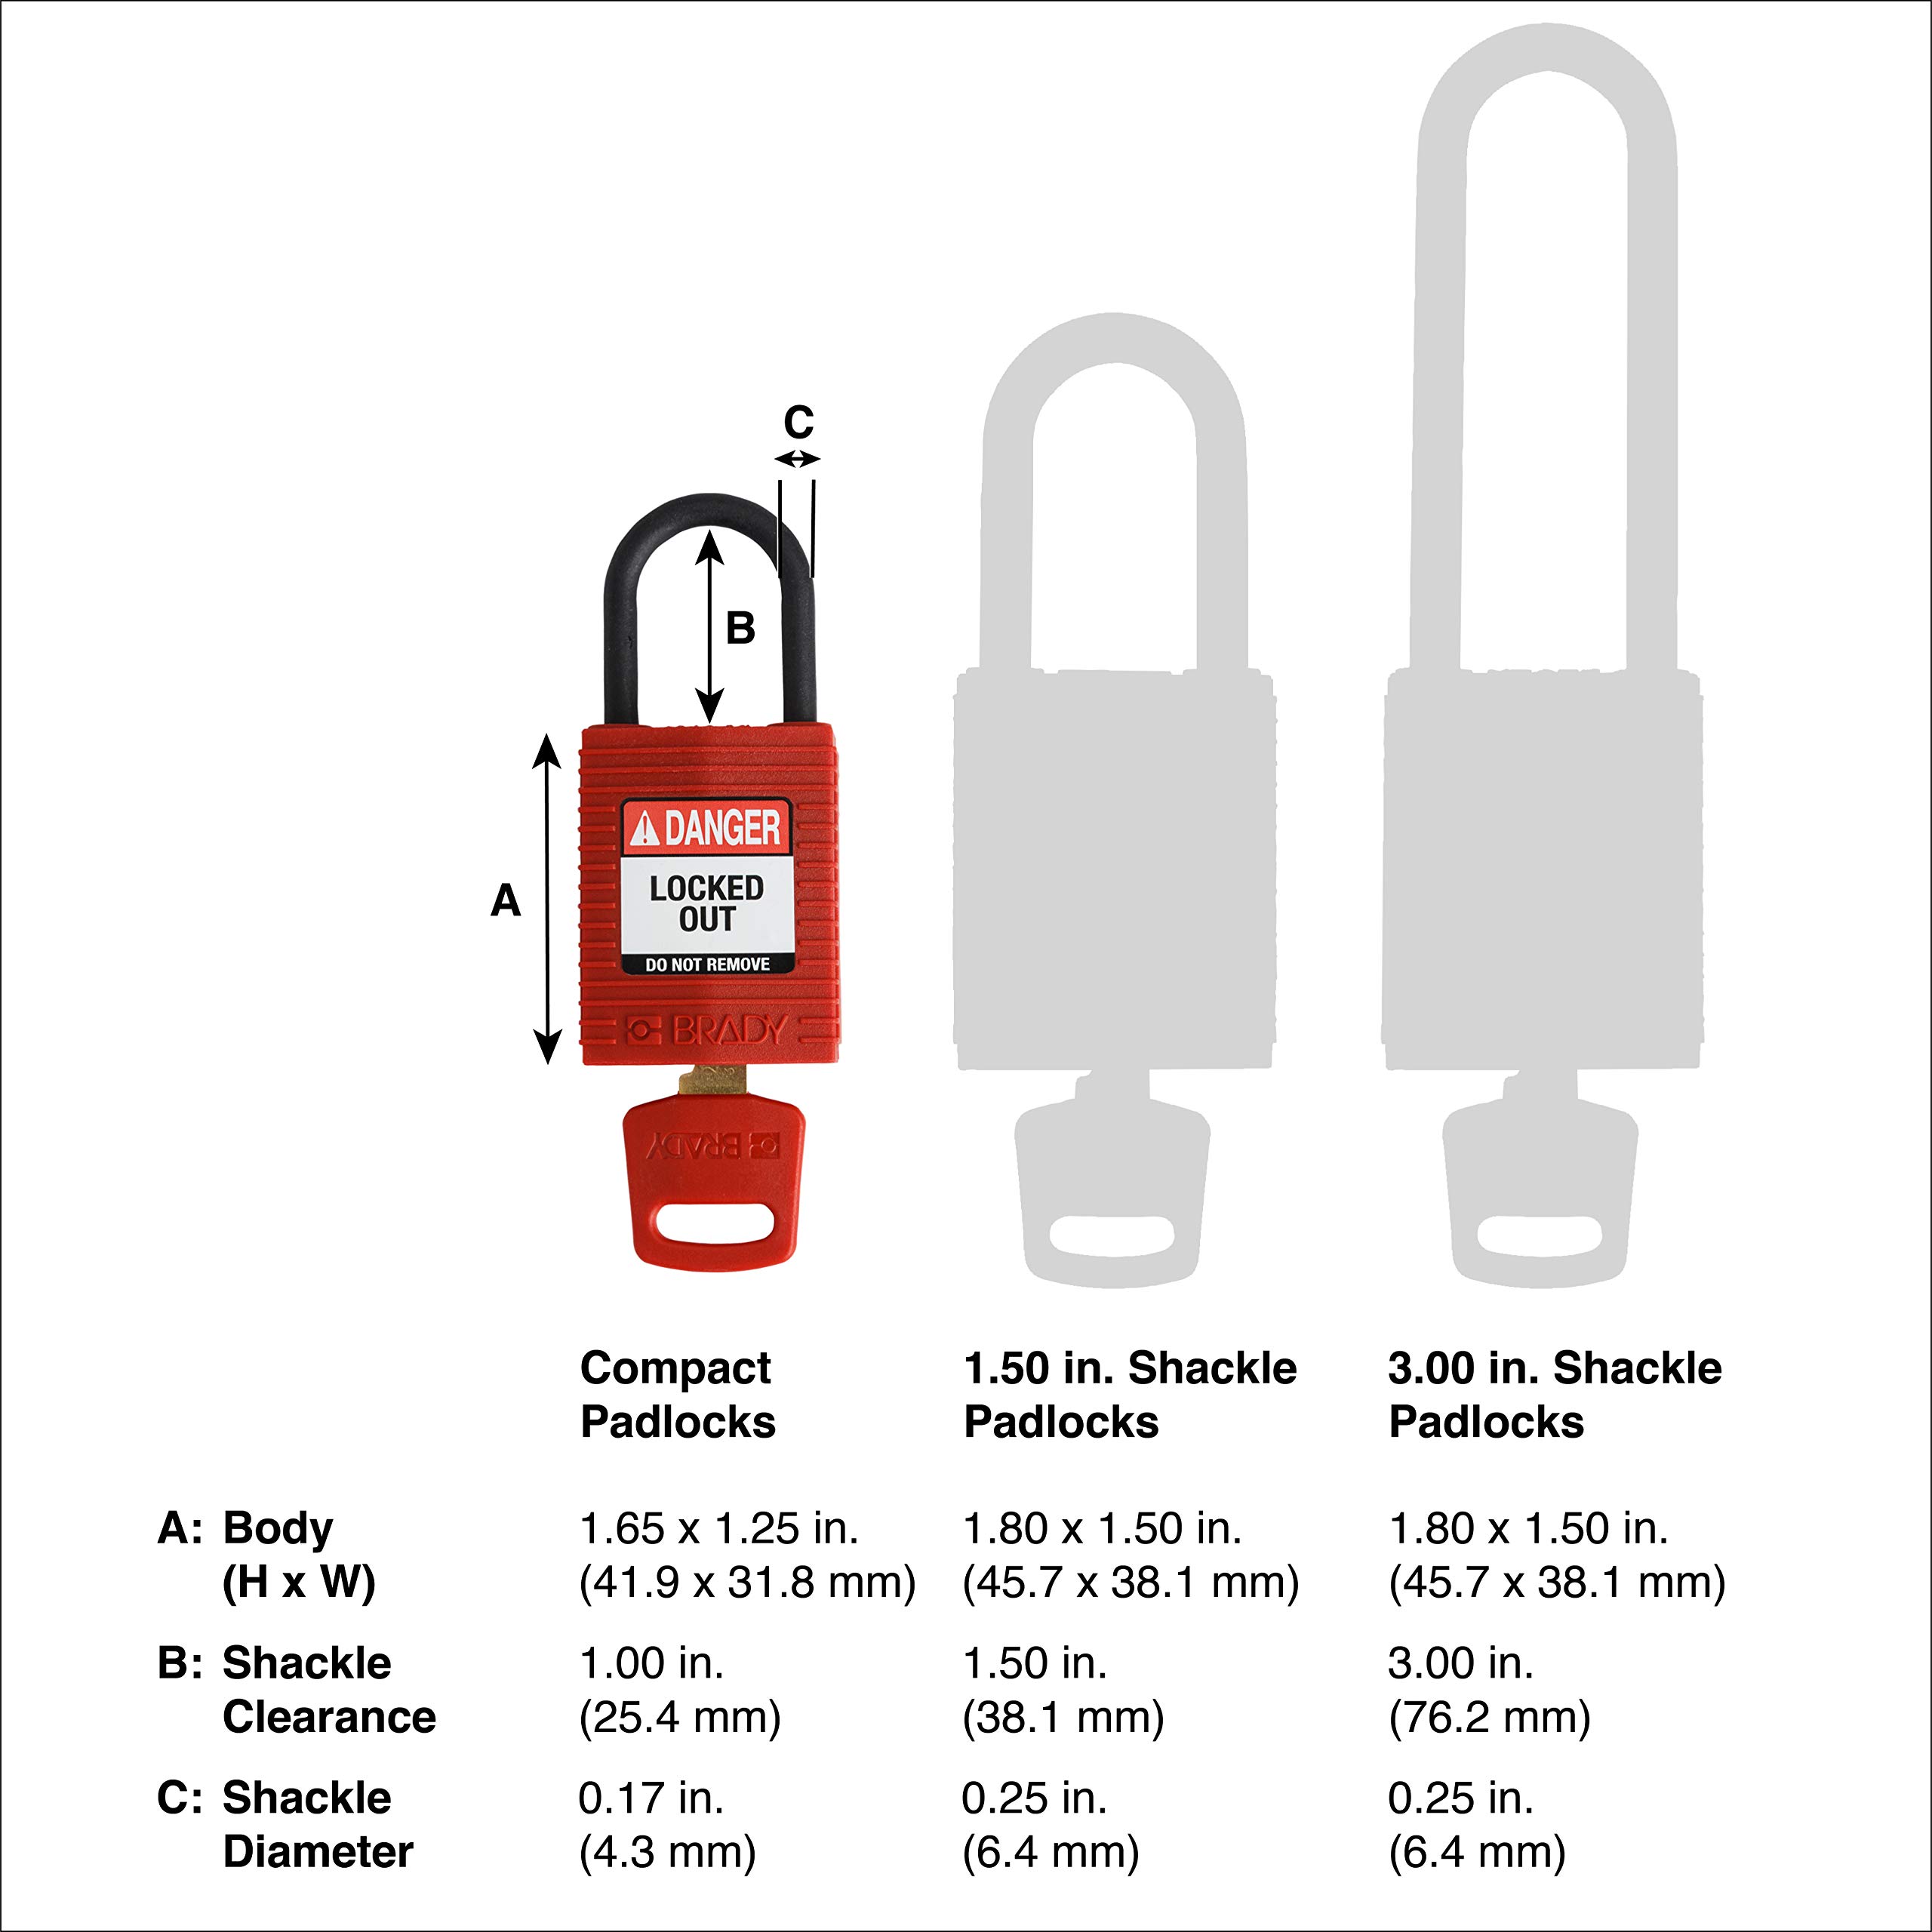 SSL padlock with a red X